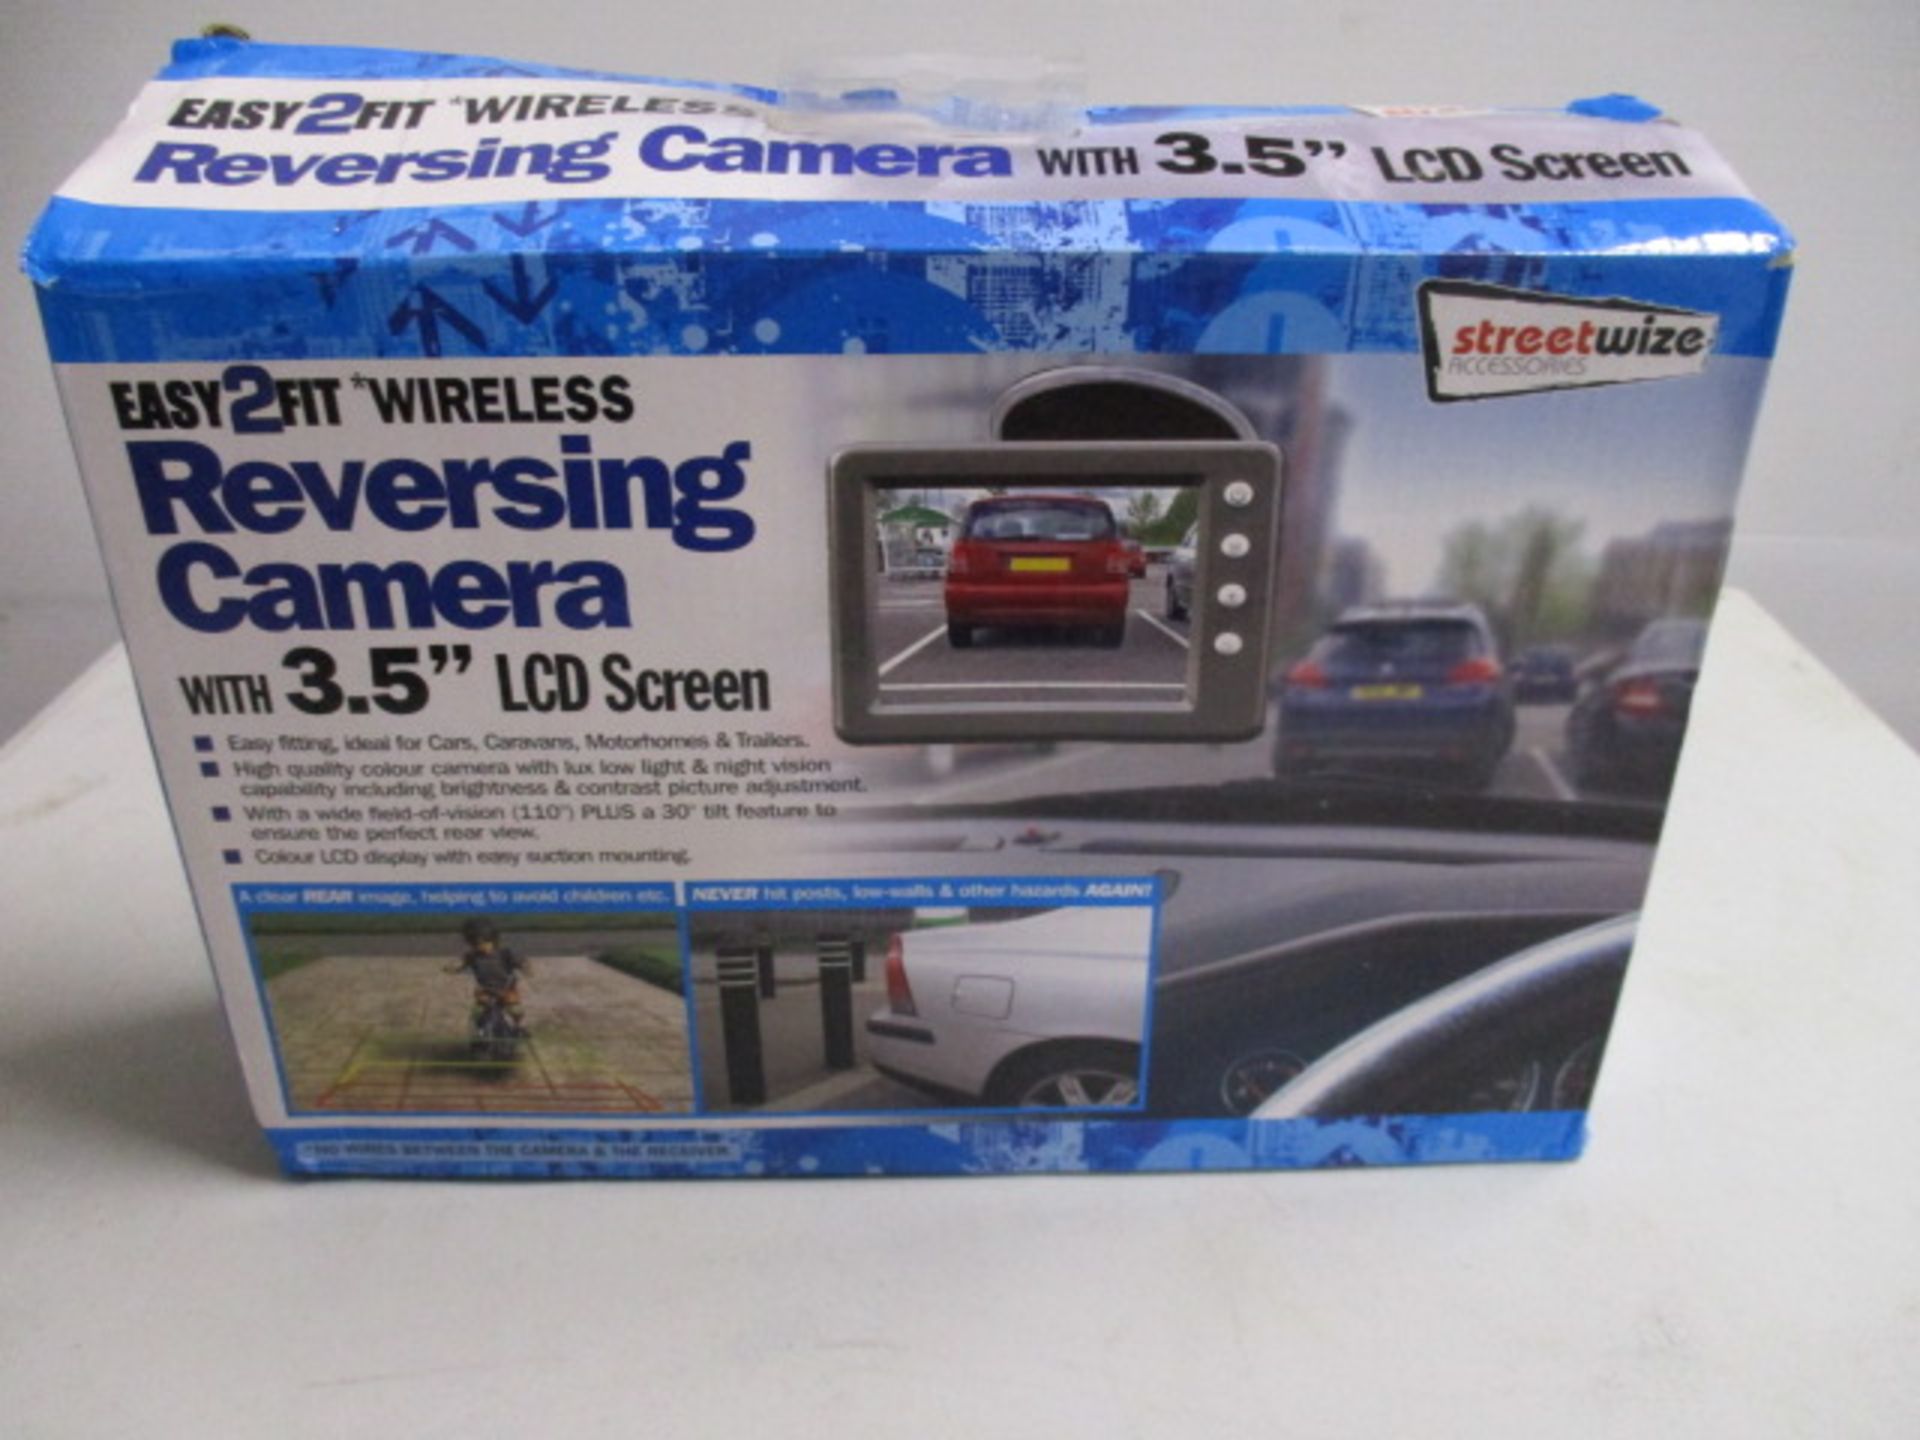 Easy to fit Streetwize wireless reversing camera looks unused and complete with attachments Model: